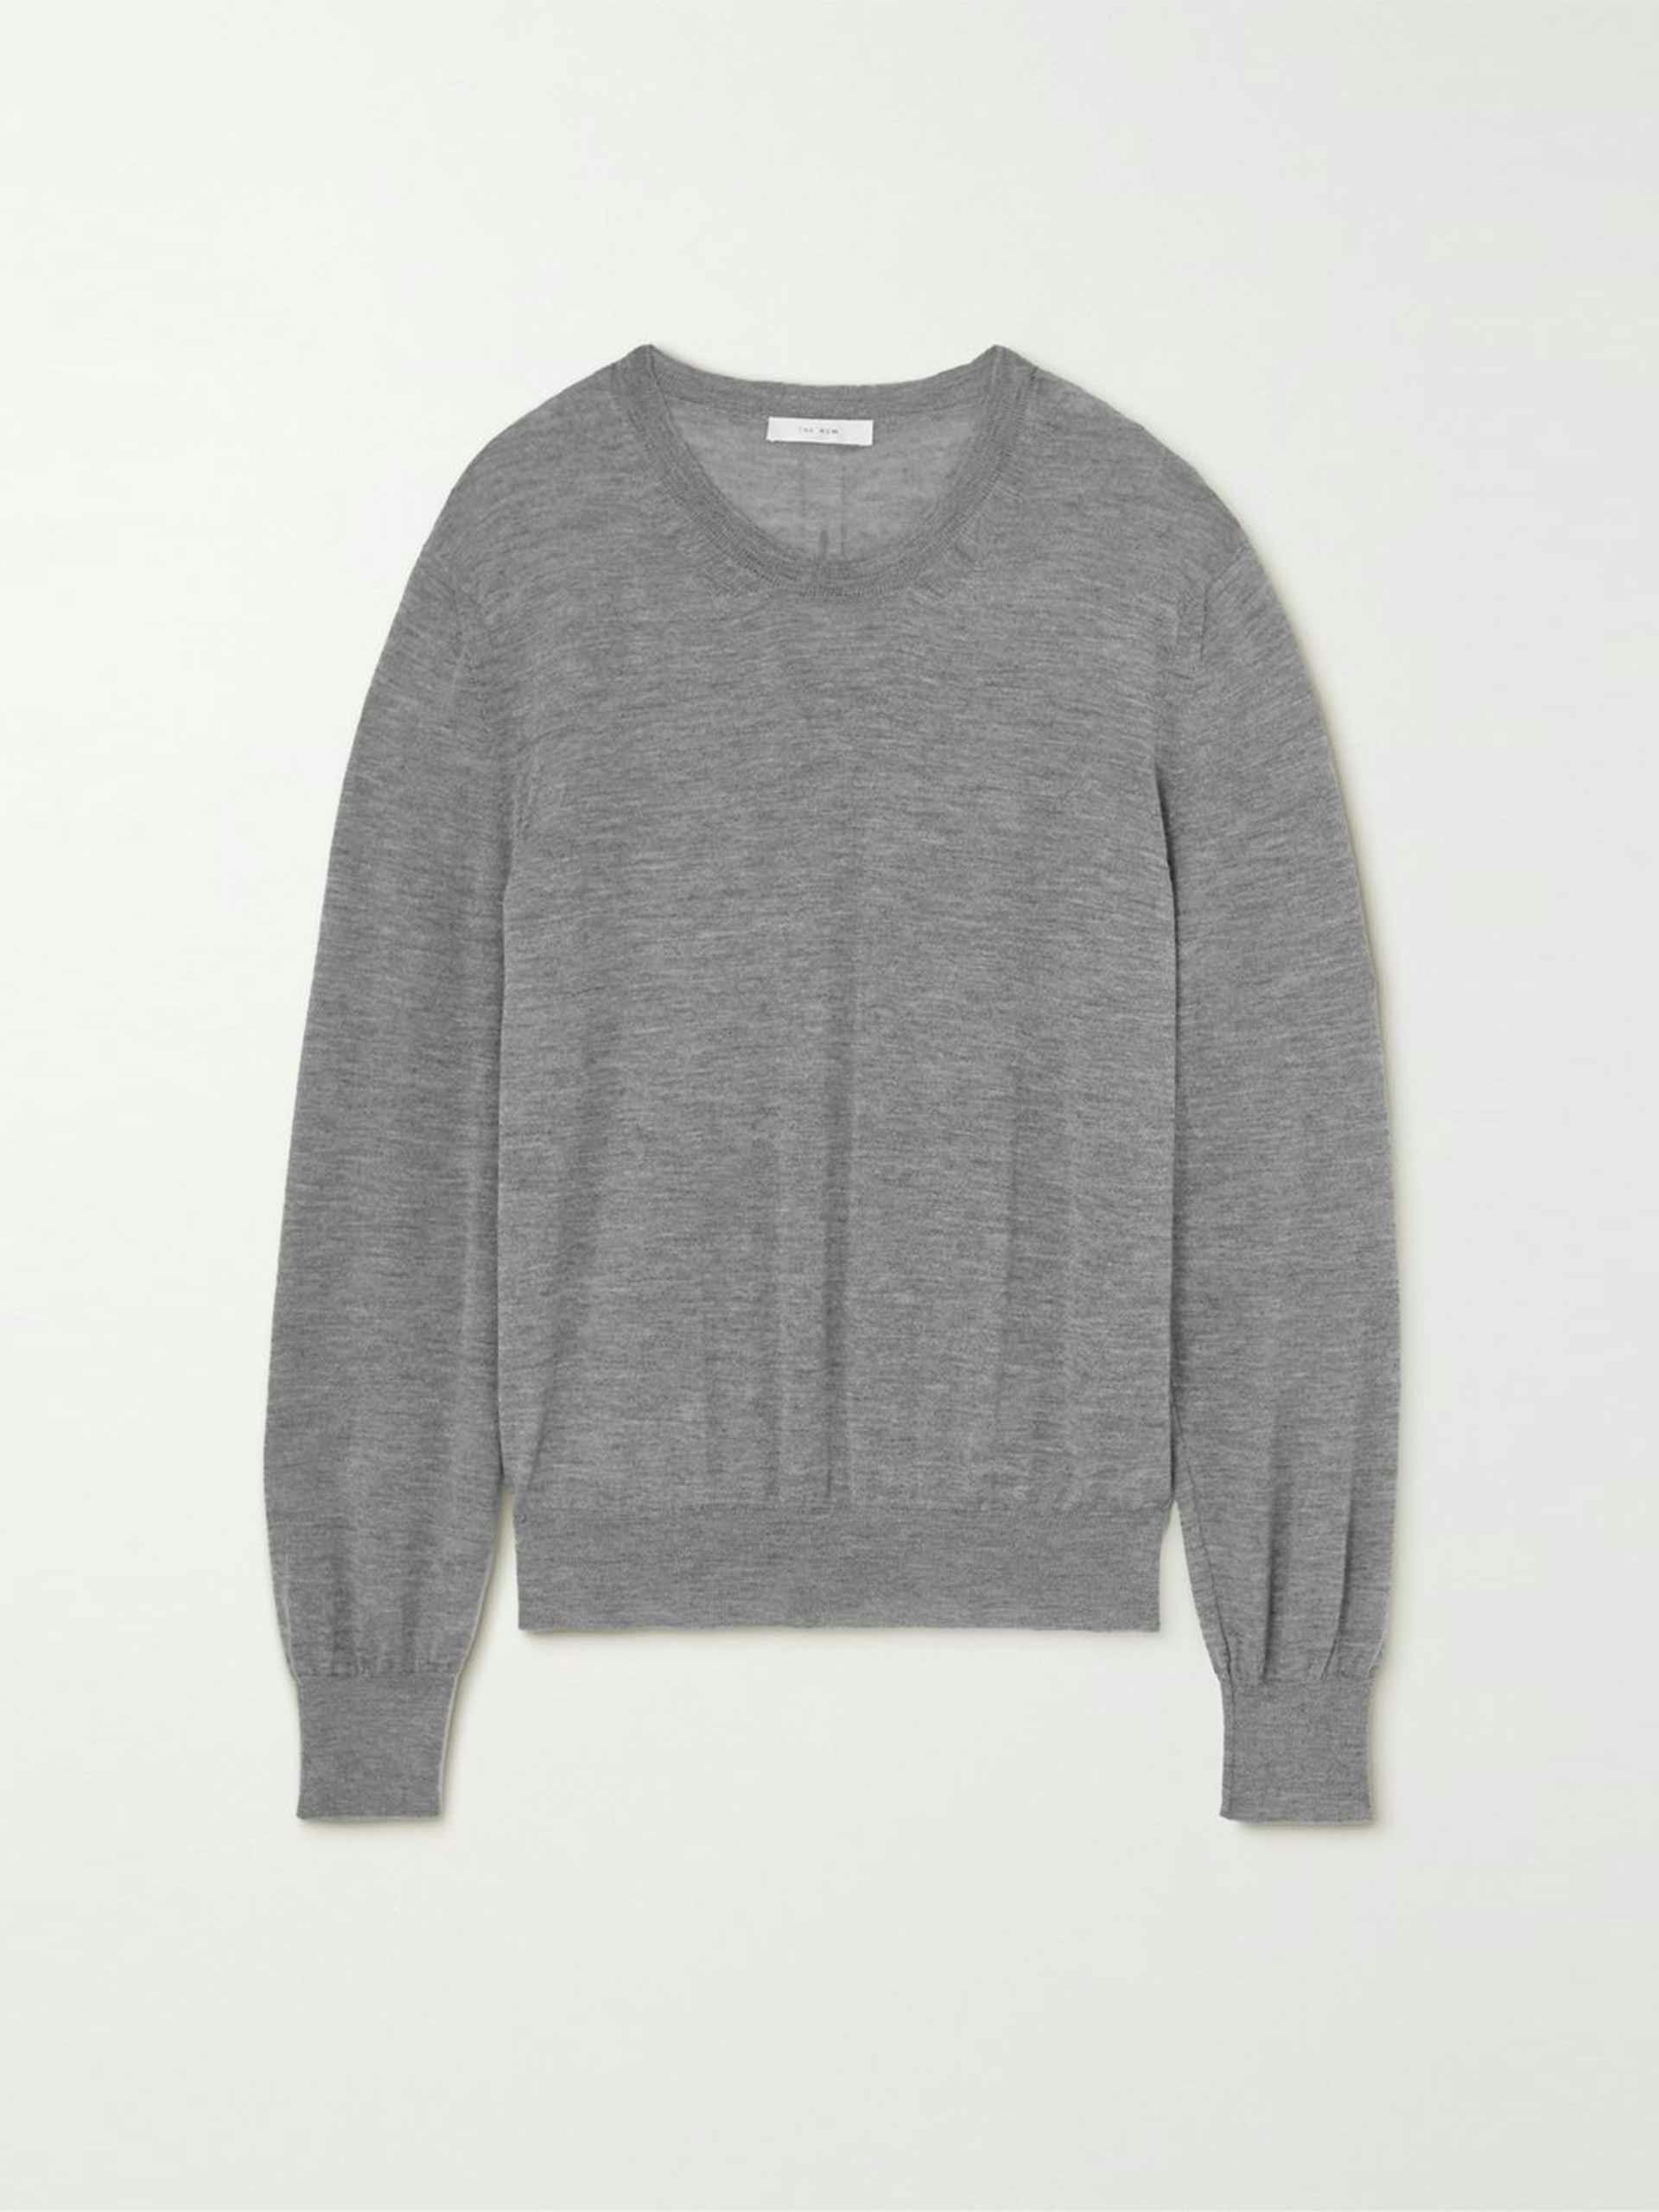 Pleated cashmere sweater